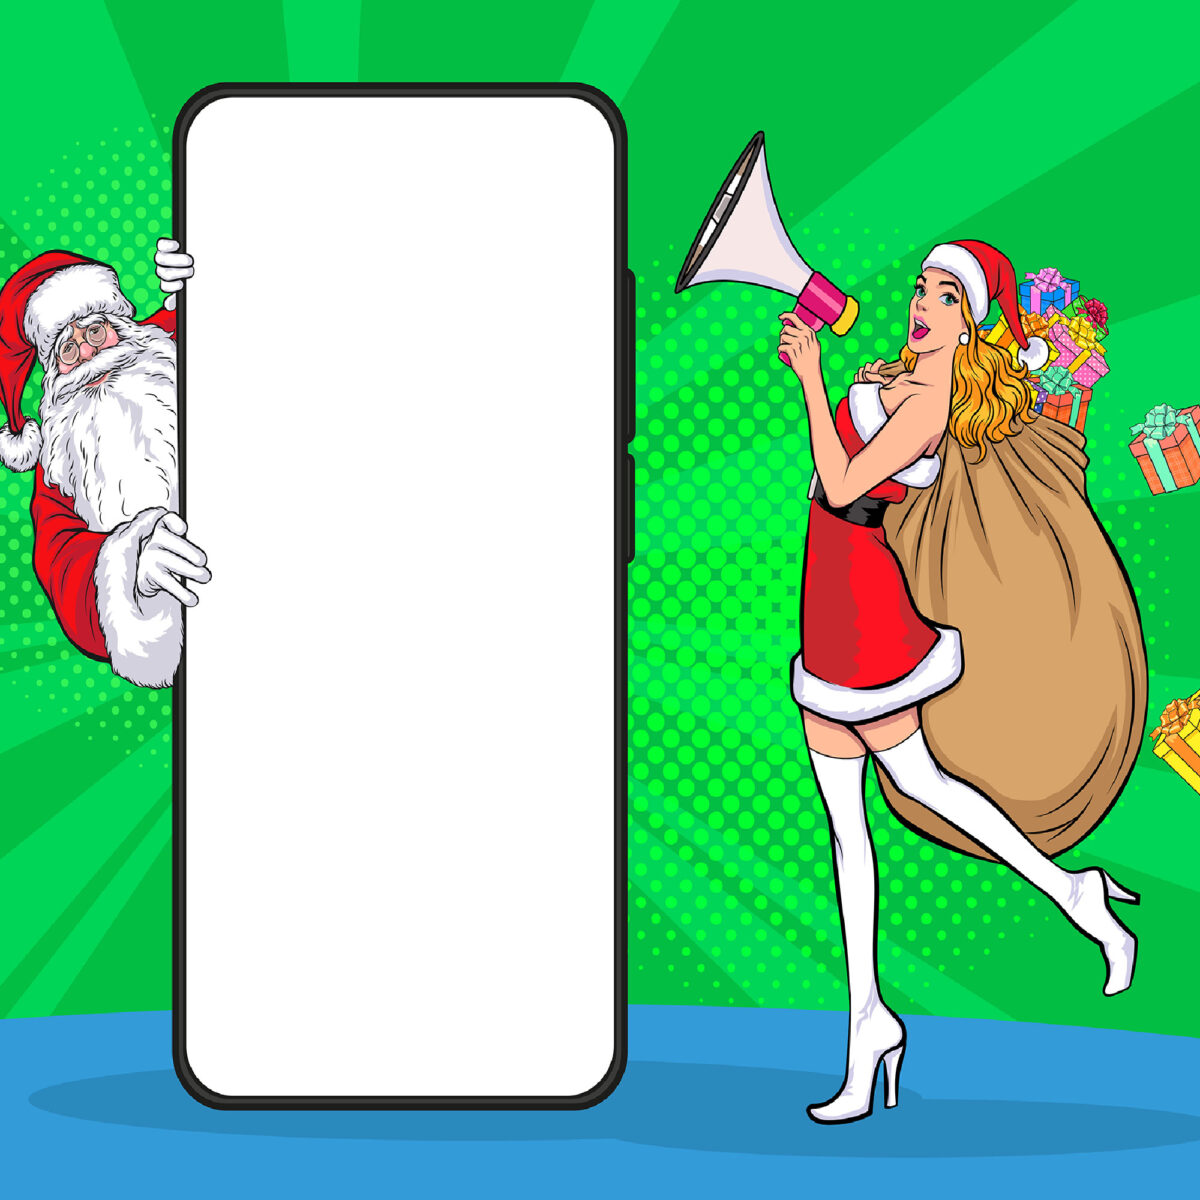 santa claus, pin up girl, gifts, mobile, red dress